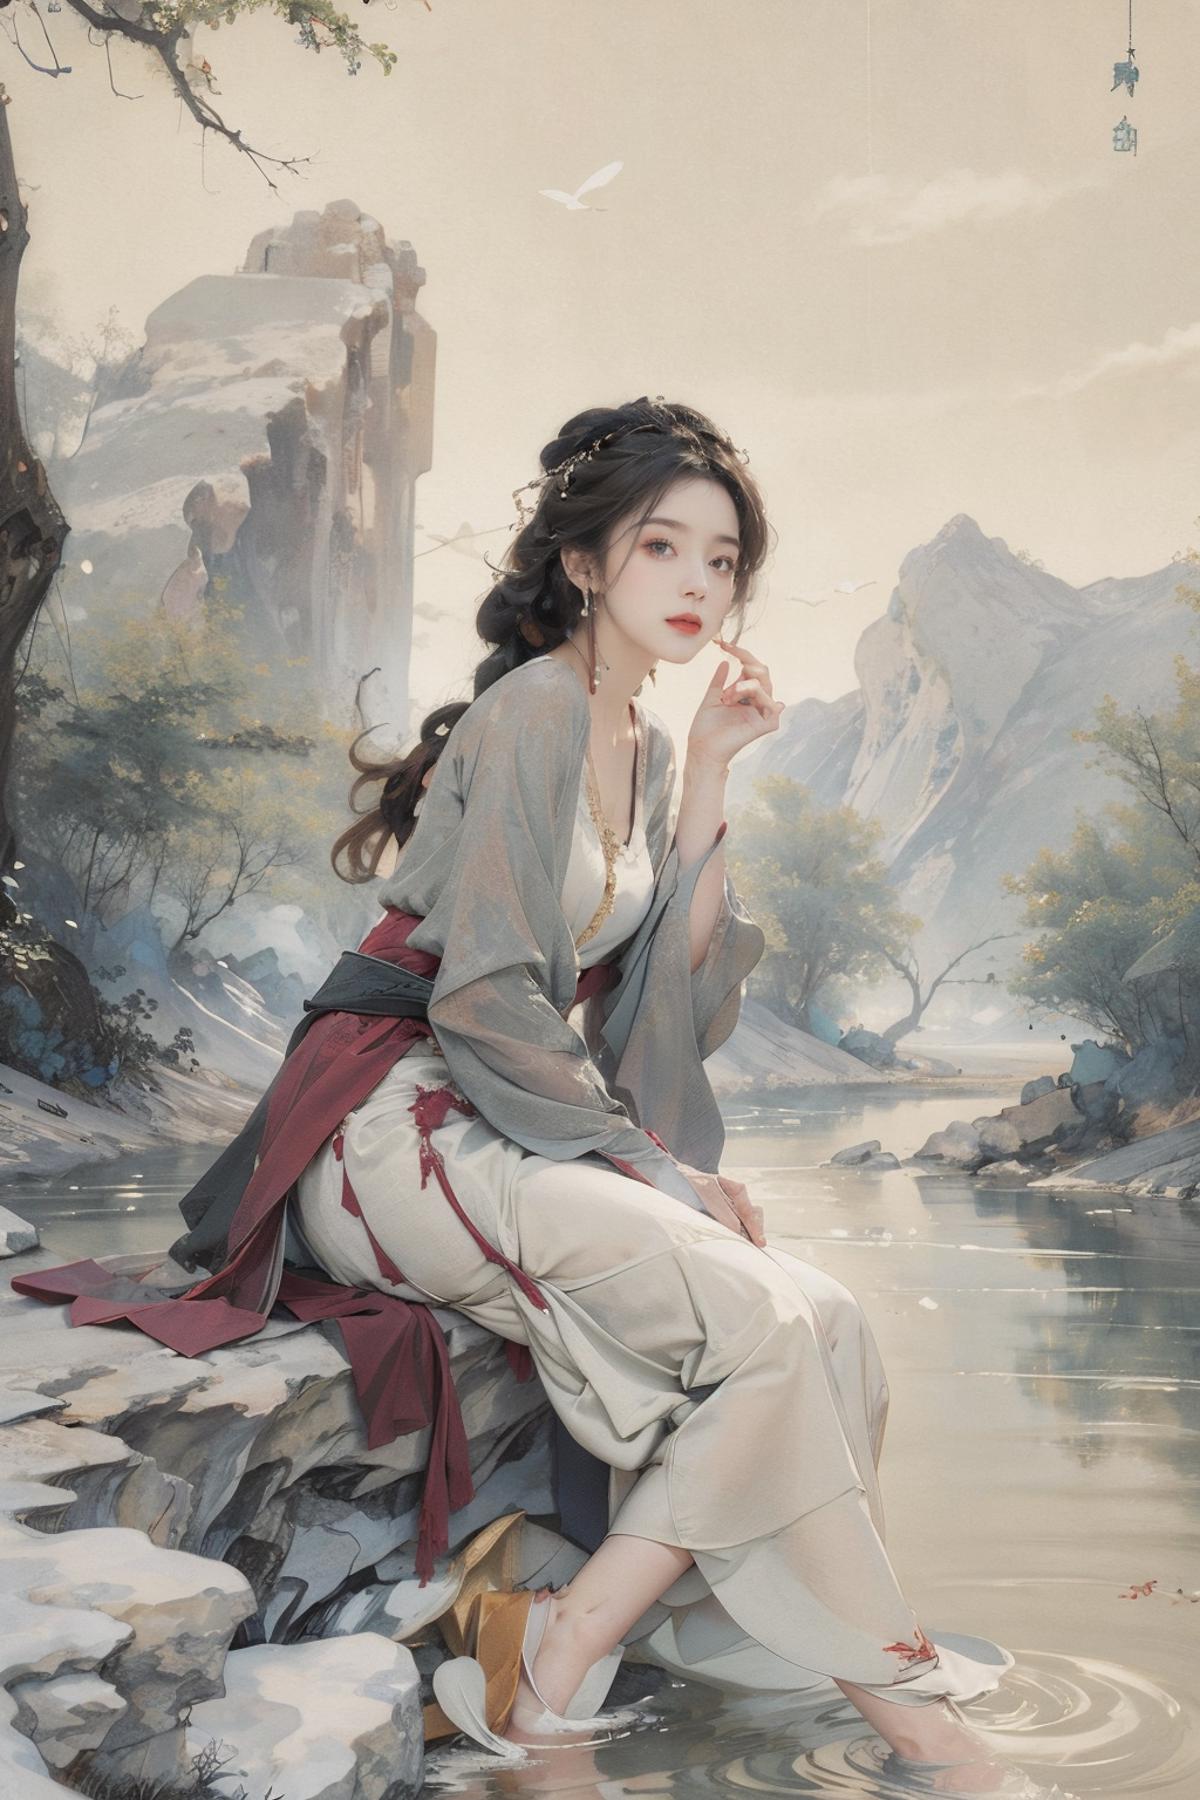 A beautiful woman sitting by a river, wearing a long dress and hair ornaments.